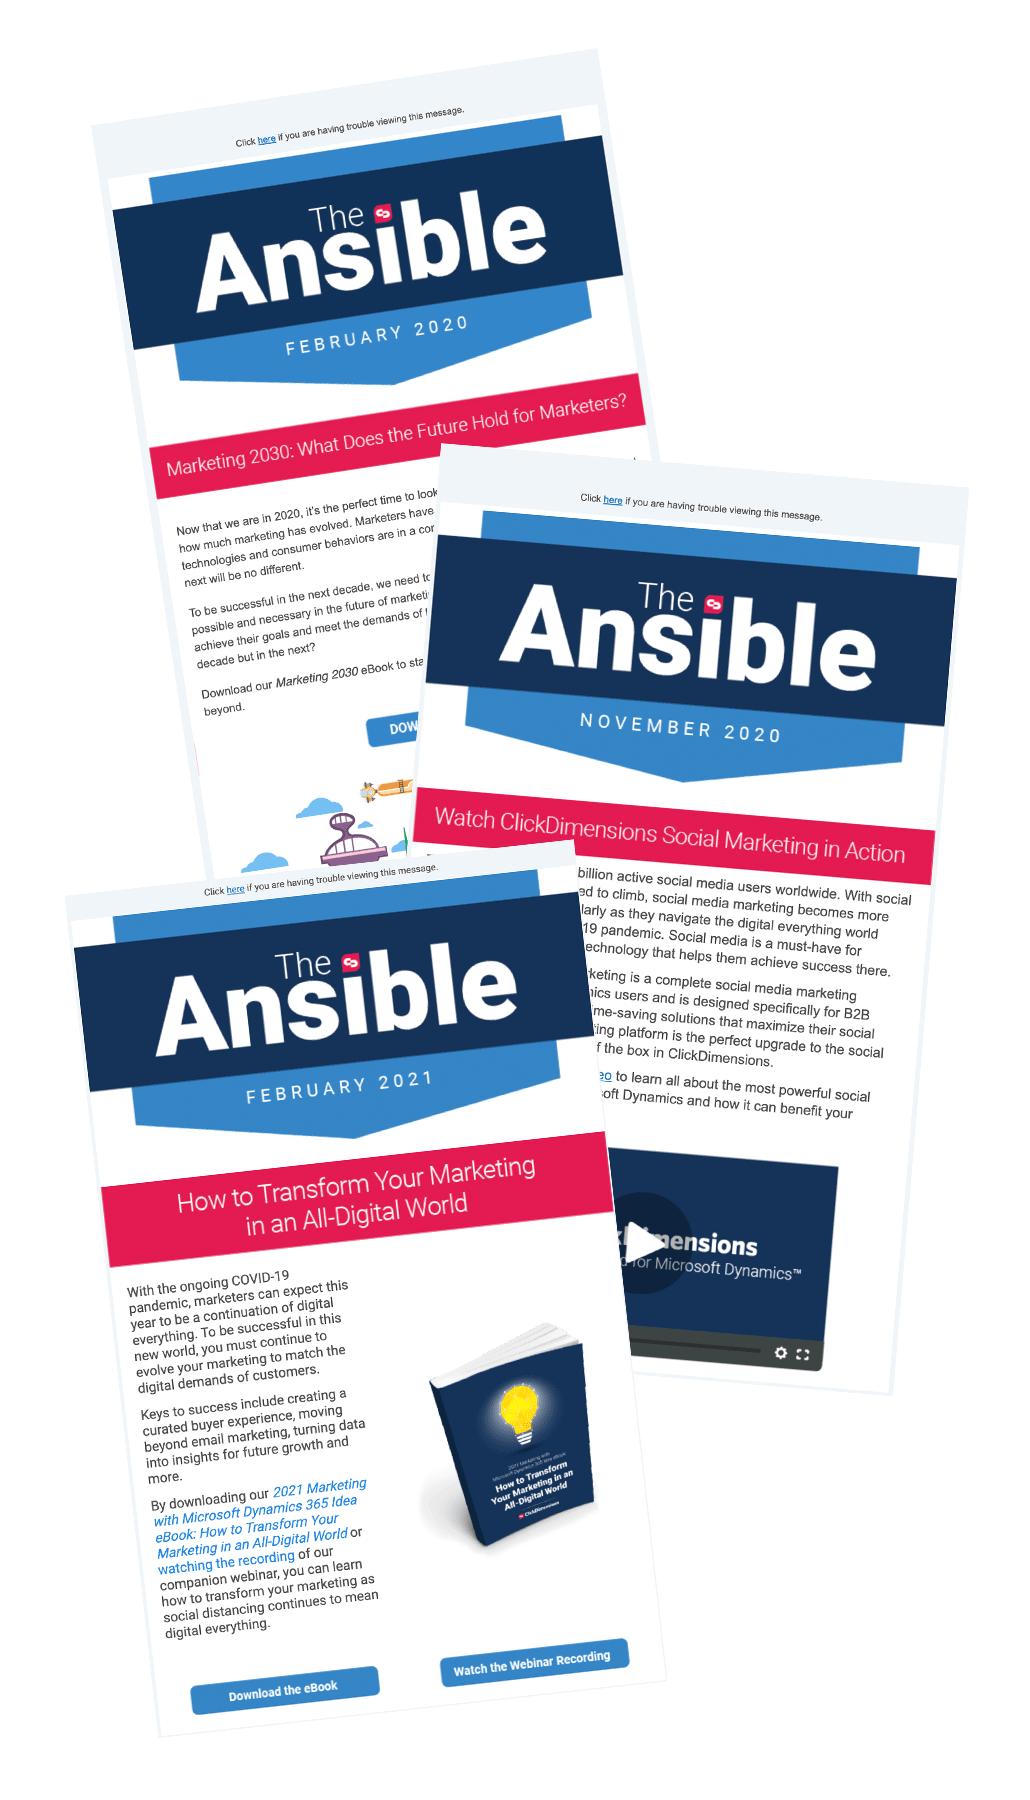 screenshots of previous Ansible newsletters